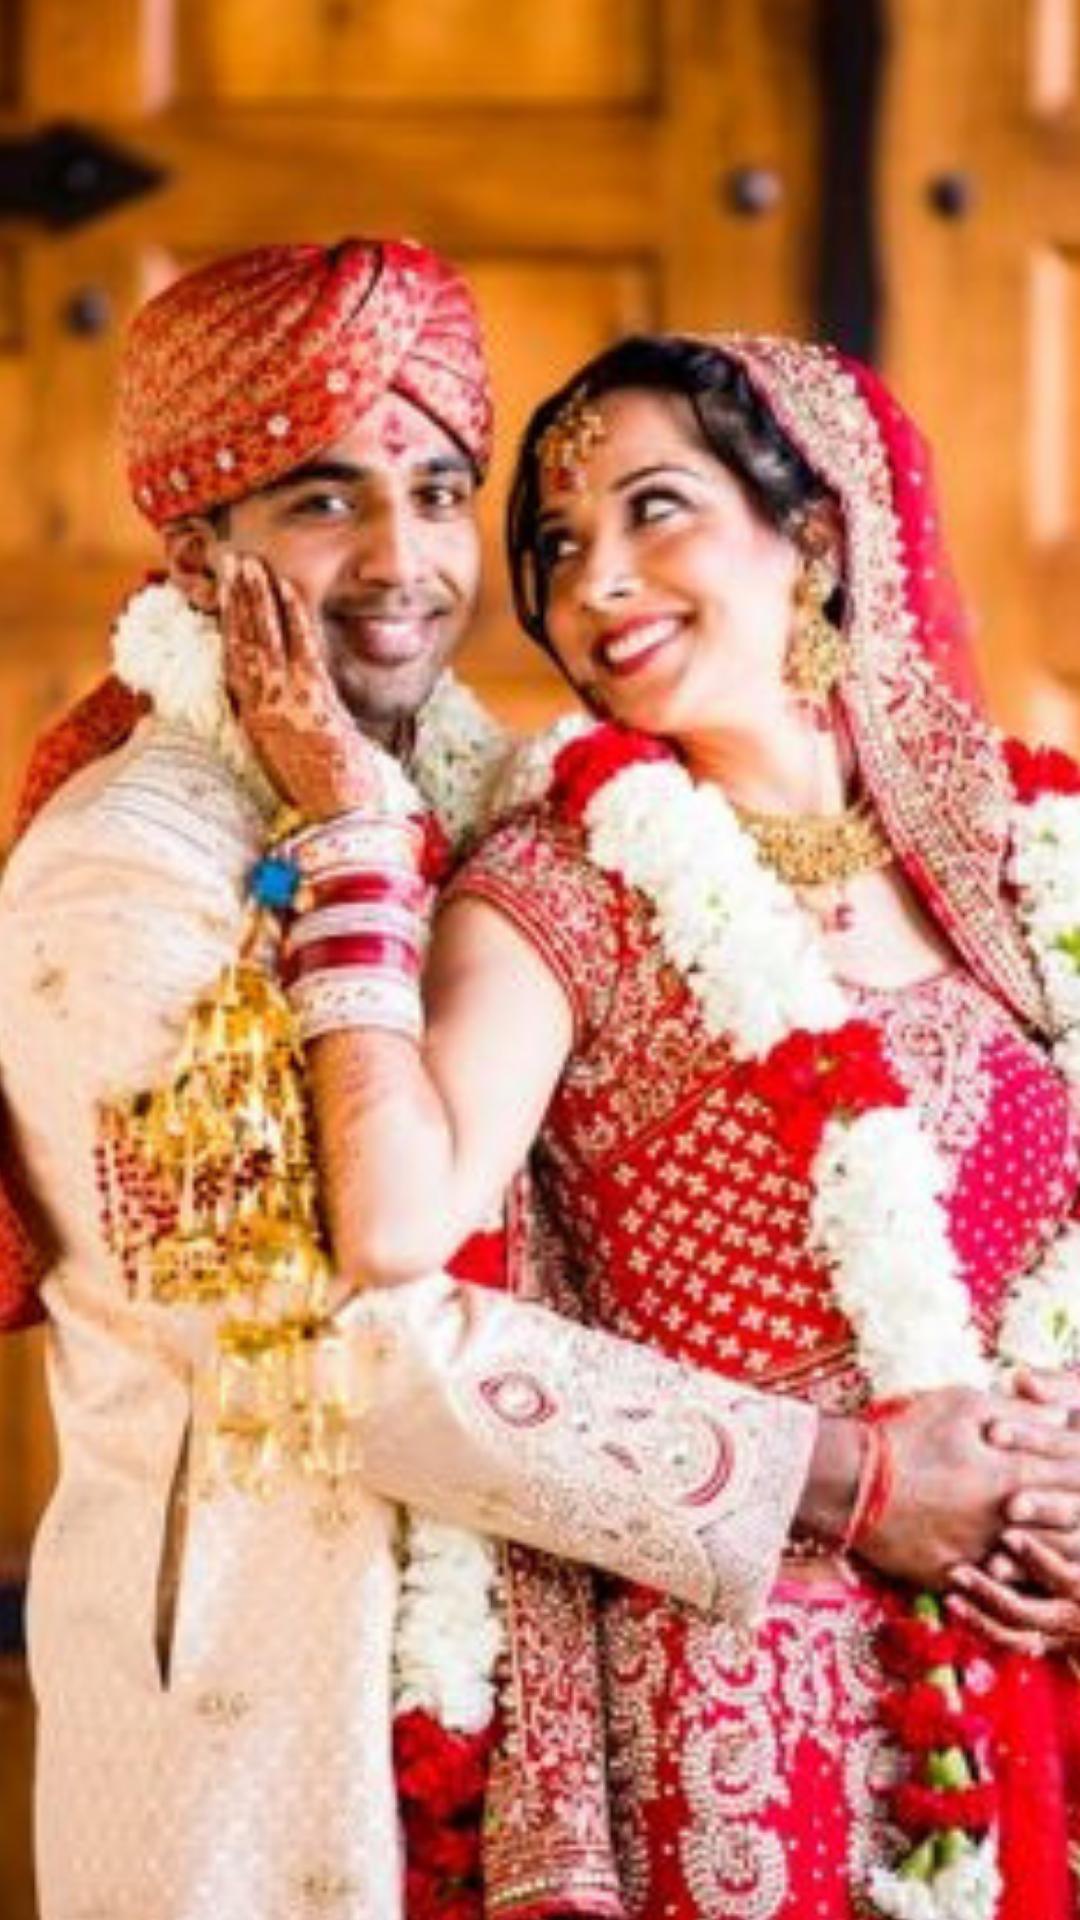 Indian Wedding Couple Photography Image Wallpaper for Android